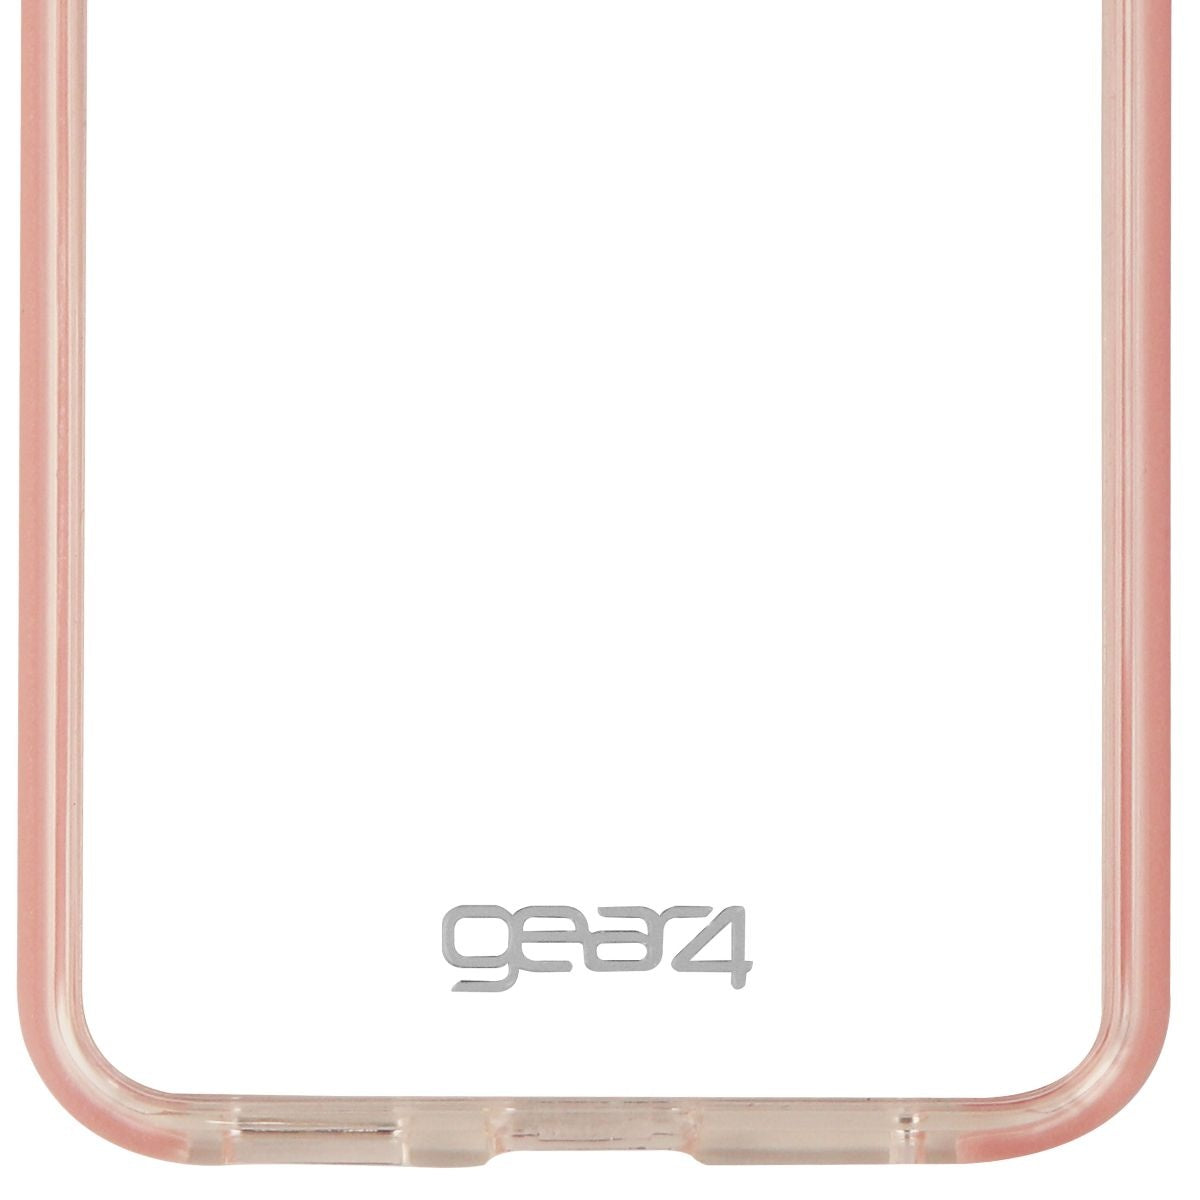 Gear4 Piccadilly Series Hybrid Hardshell Slim Case for LG G6 - Clear / Pink